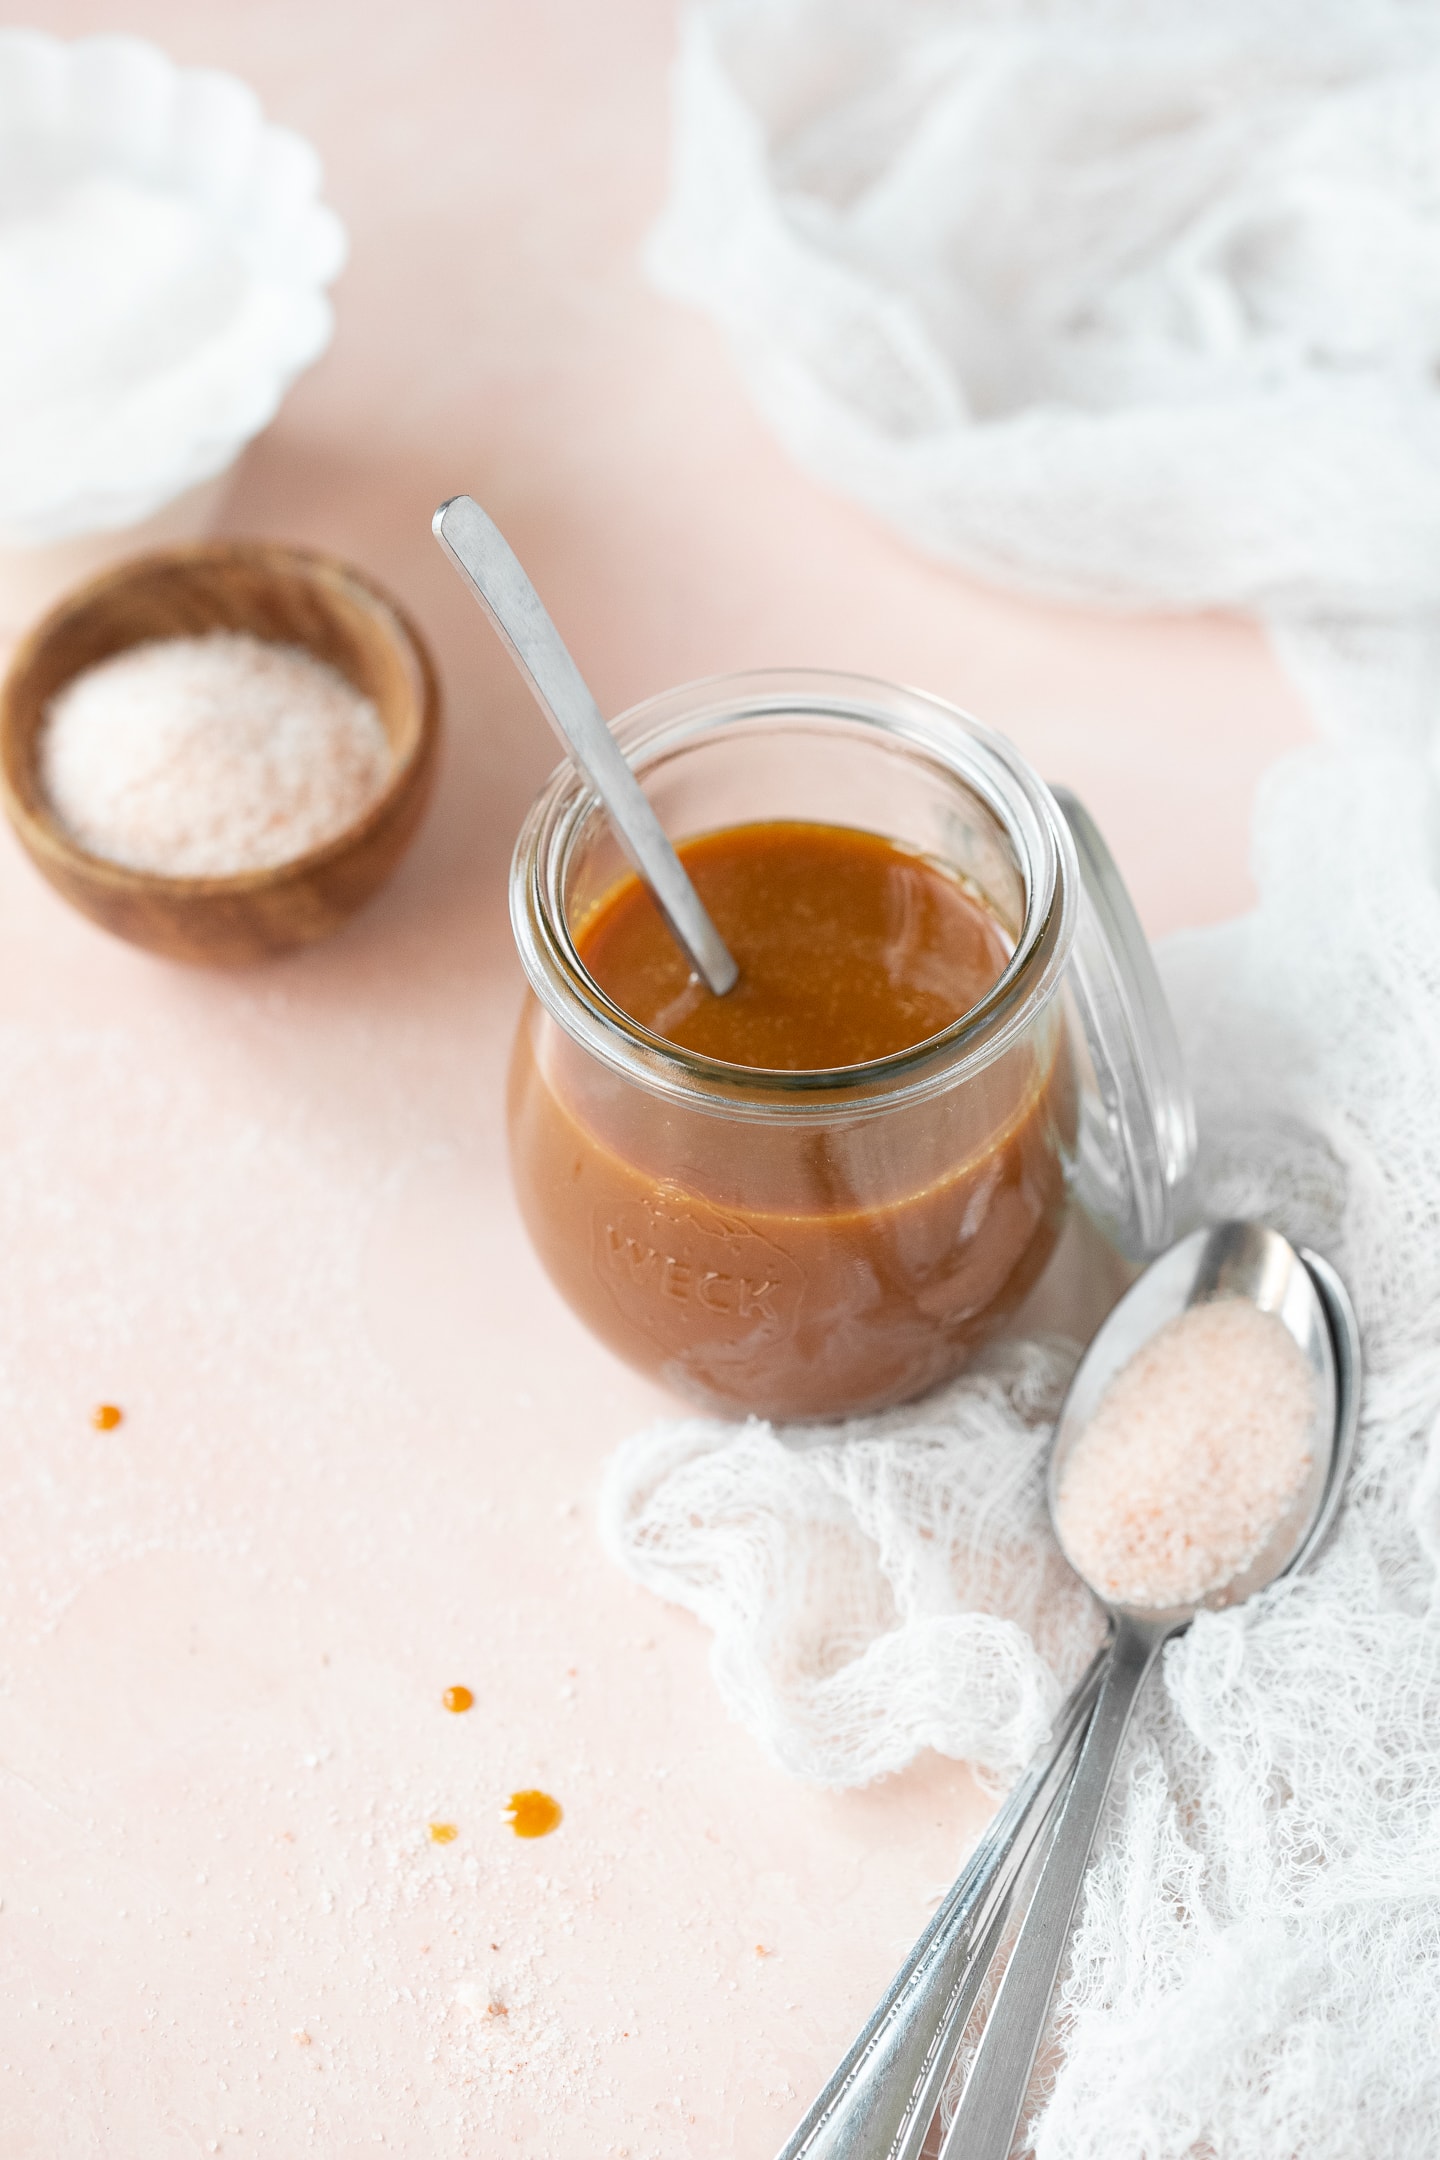 Front angled view of a jar of caramel sauce alongside bowls of sugar and sea salt, with a spoon of sea salt nearby.